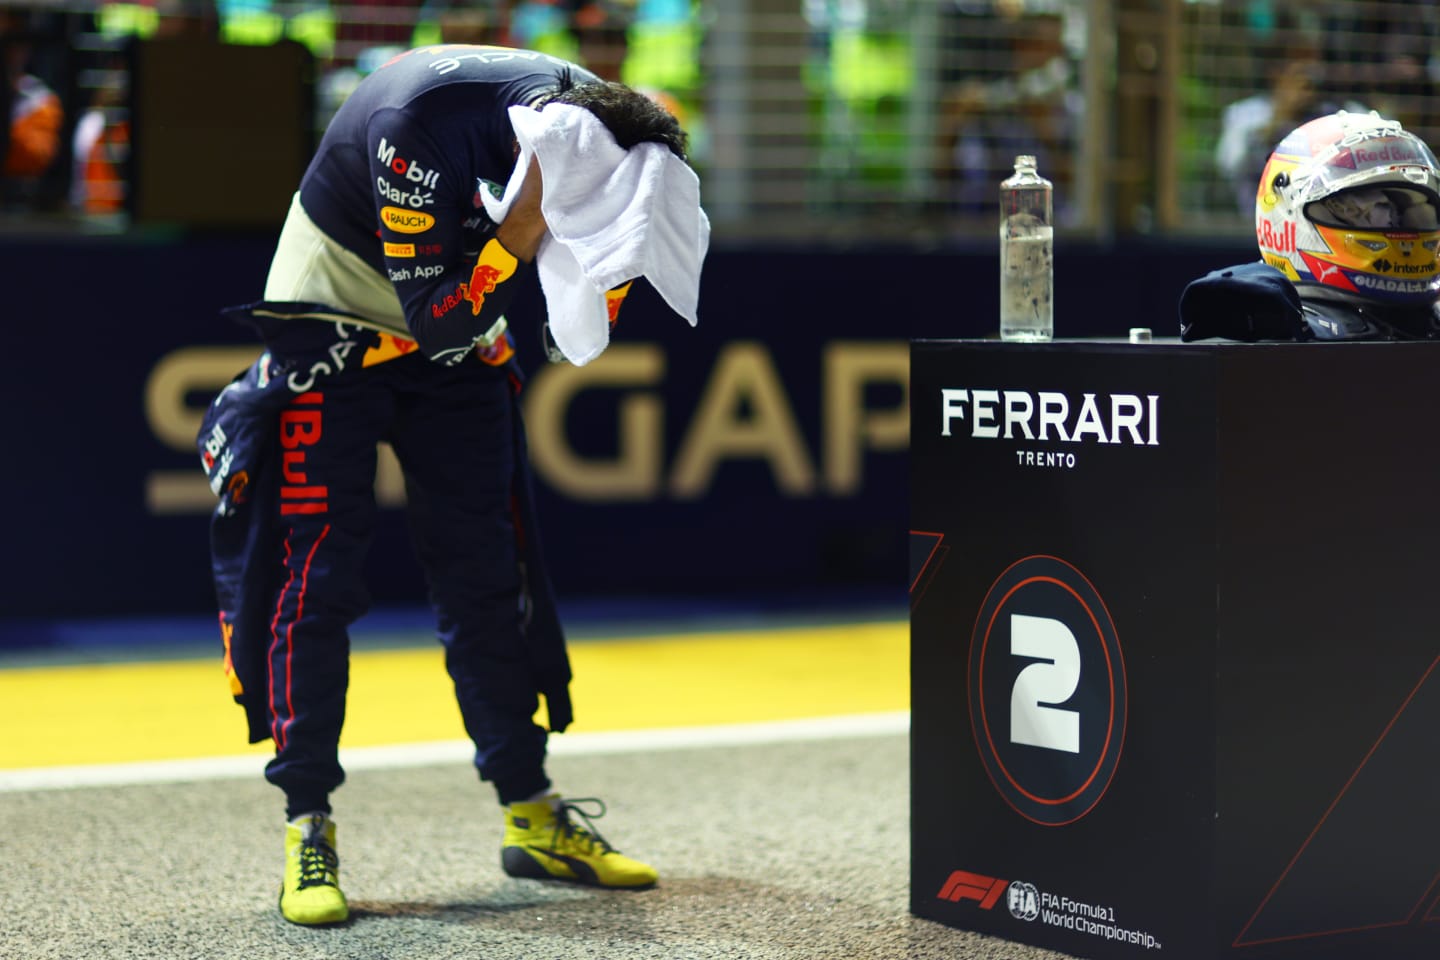 SINGAPORE, SINGAPORE - OCTOBER 01: Second placed qualifier Sergio Perez of Mexico and Oracle Red Bull Racing wipes his head with a towel in parc ferme during qualifying ahead of the F1 Grand Prix of Singapore at Marina Bay Street Circuit on October 01, 2022 in Singapore, Singapore. (Photo by Dan Istitene - Formula 1/Formula 1 via Getty Images)